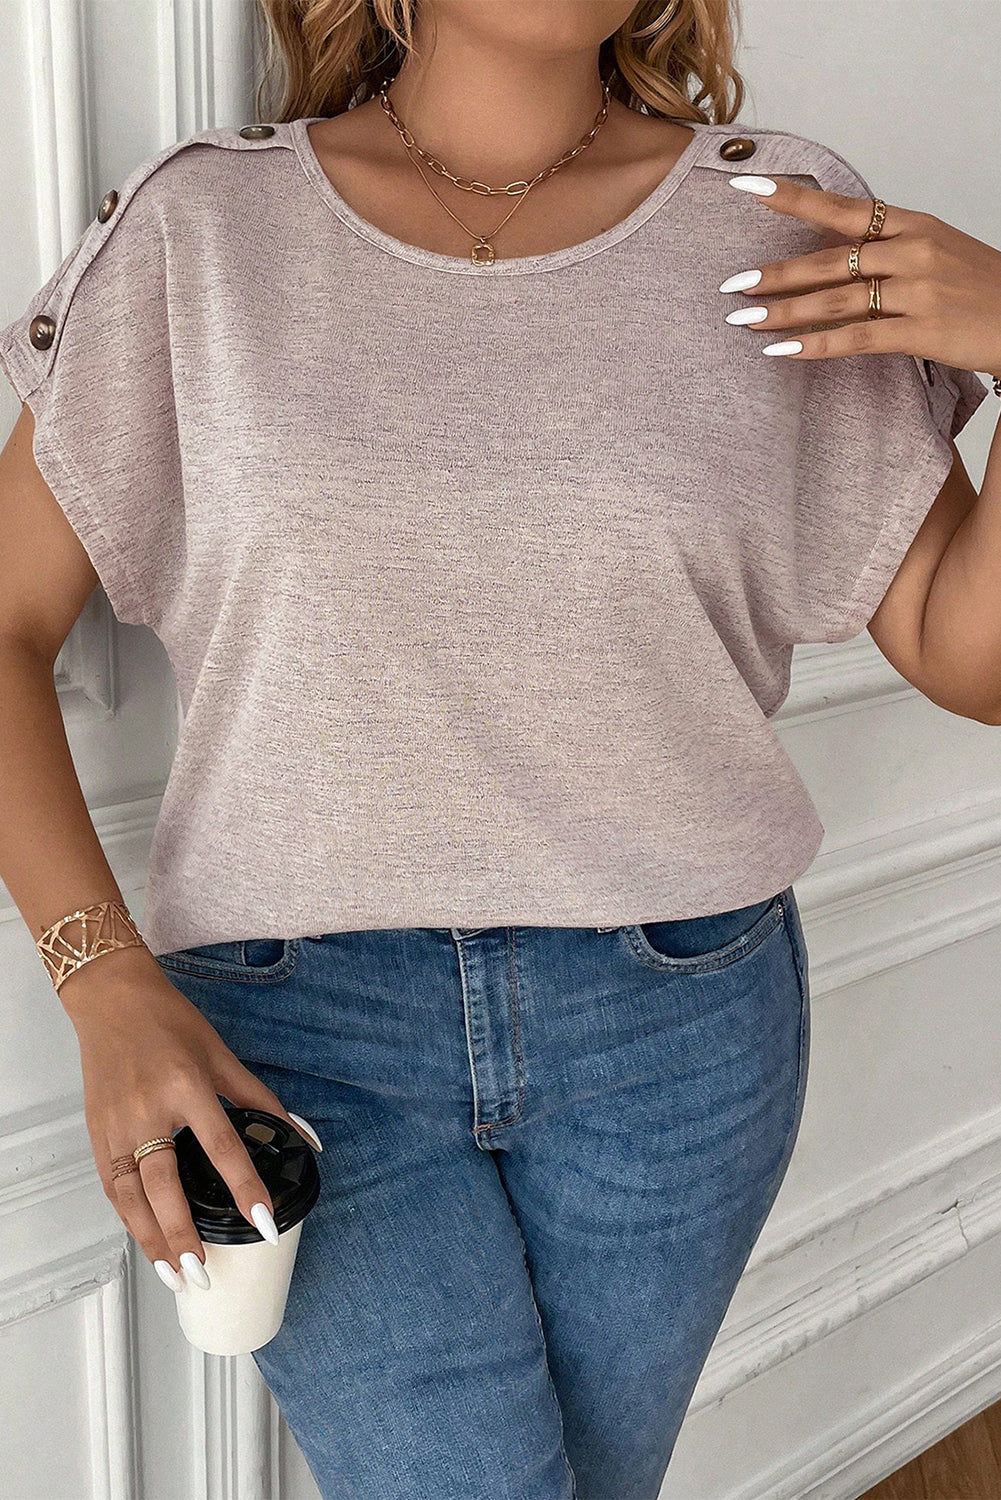 Delicacy Plus Size Button Detail Batwing Sleeve Tee-ECB